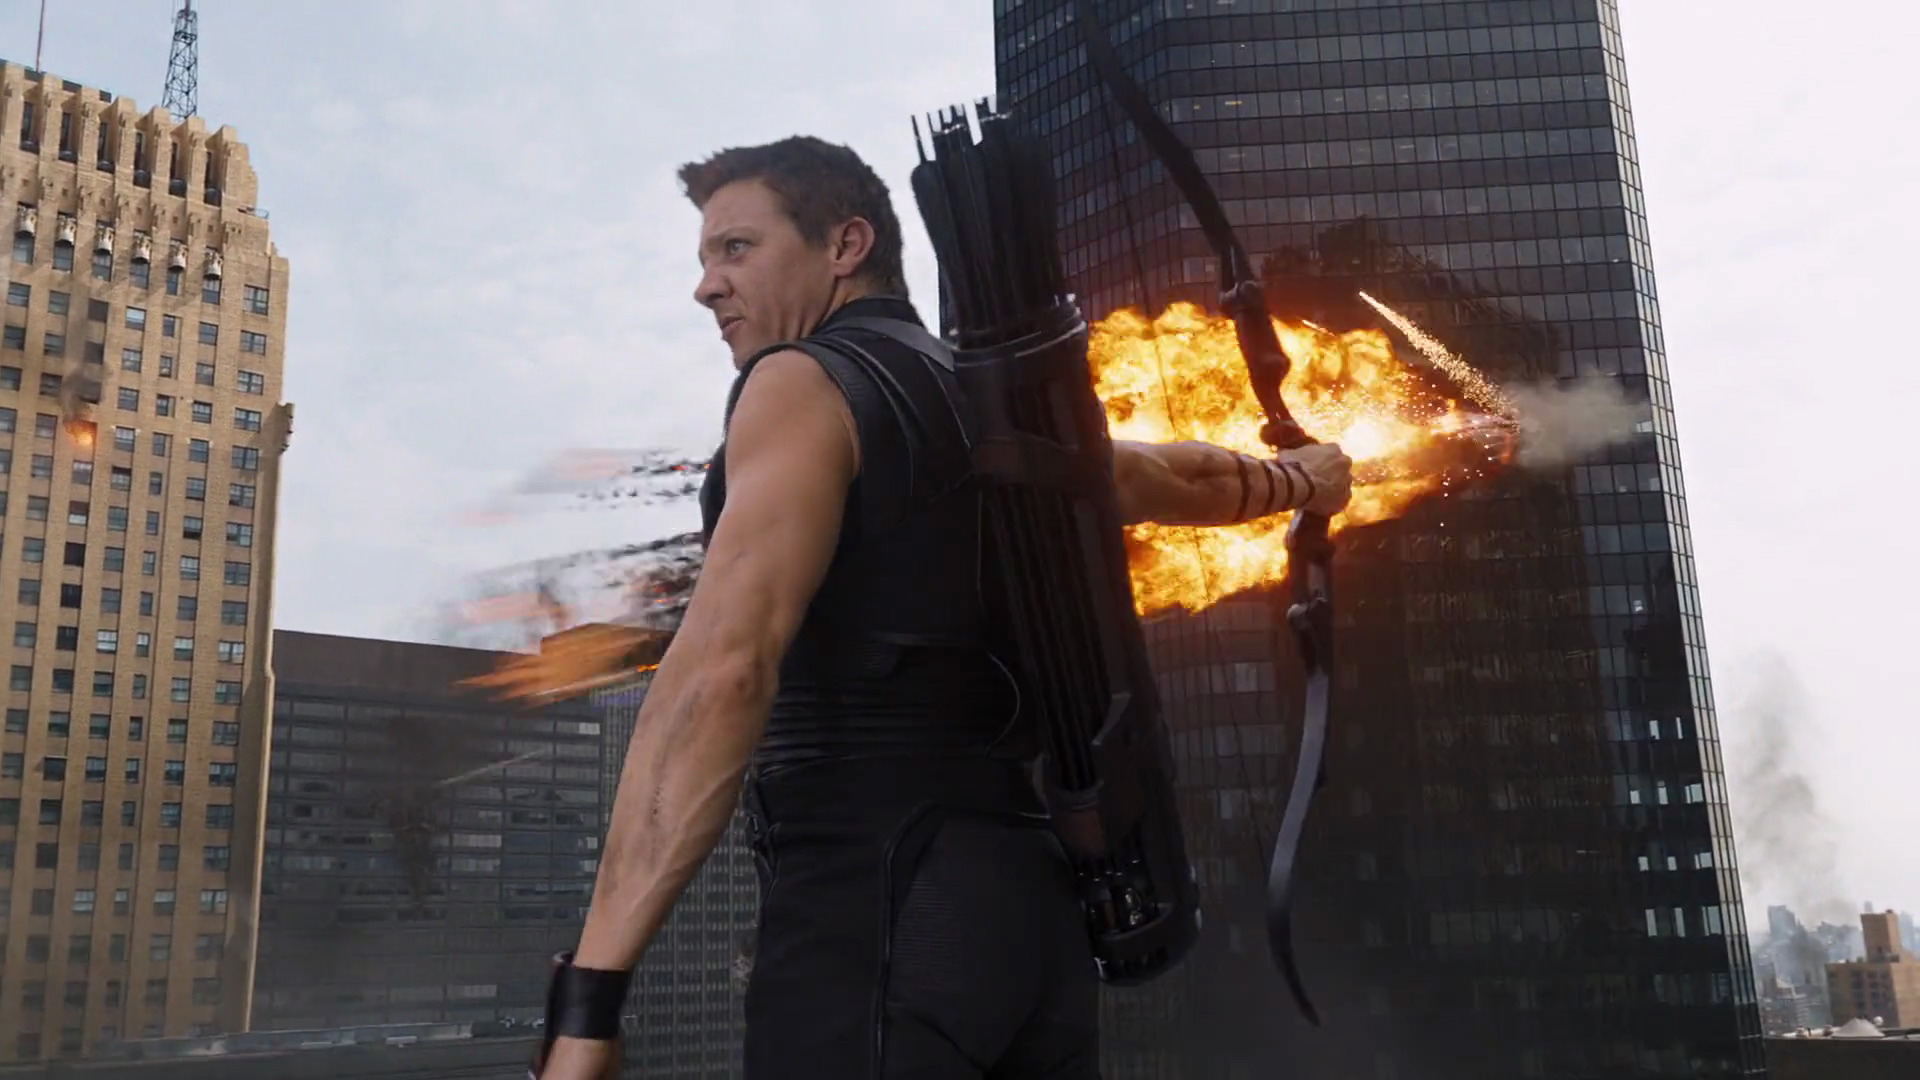 http://vignette3.wikia.nocookie.net/marvelcinematicuniverse/images/e/eb/The-Avengers-Climax-Hawkeye-the-avengers-34726152-1920-1080.jpg/revision/latest?cb=20130902154951